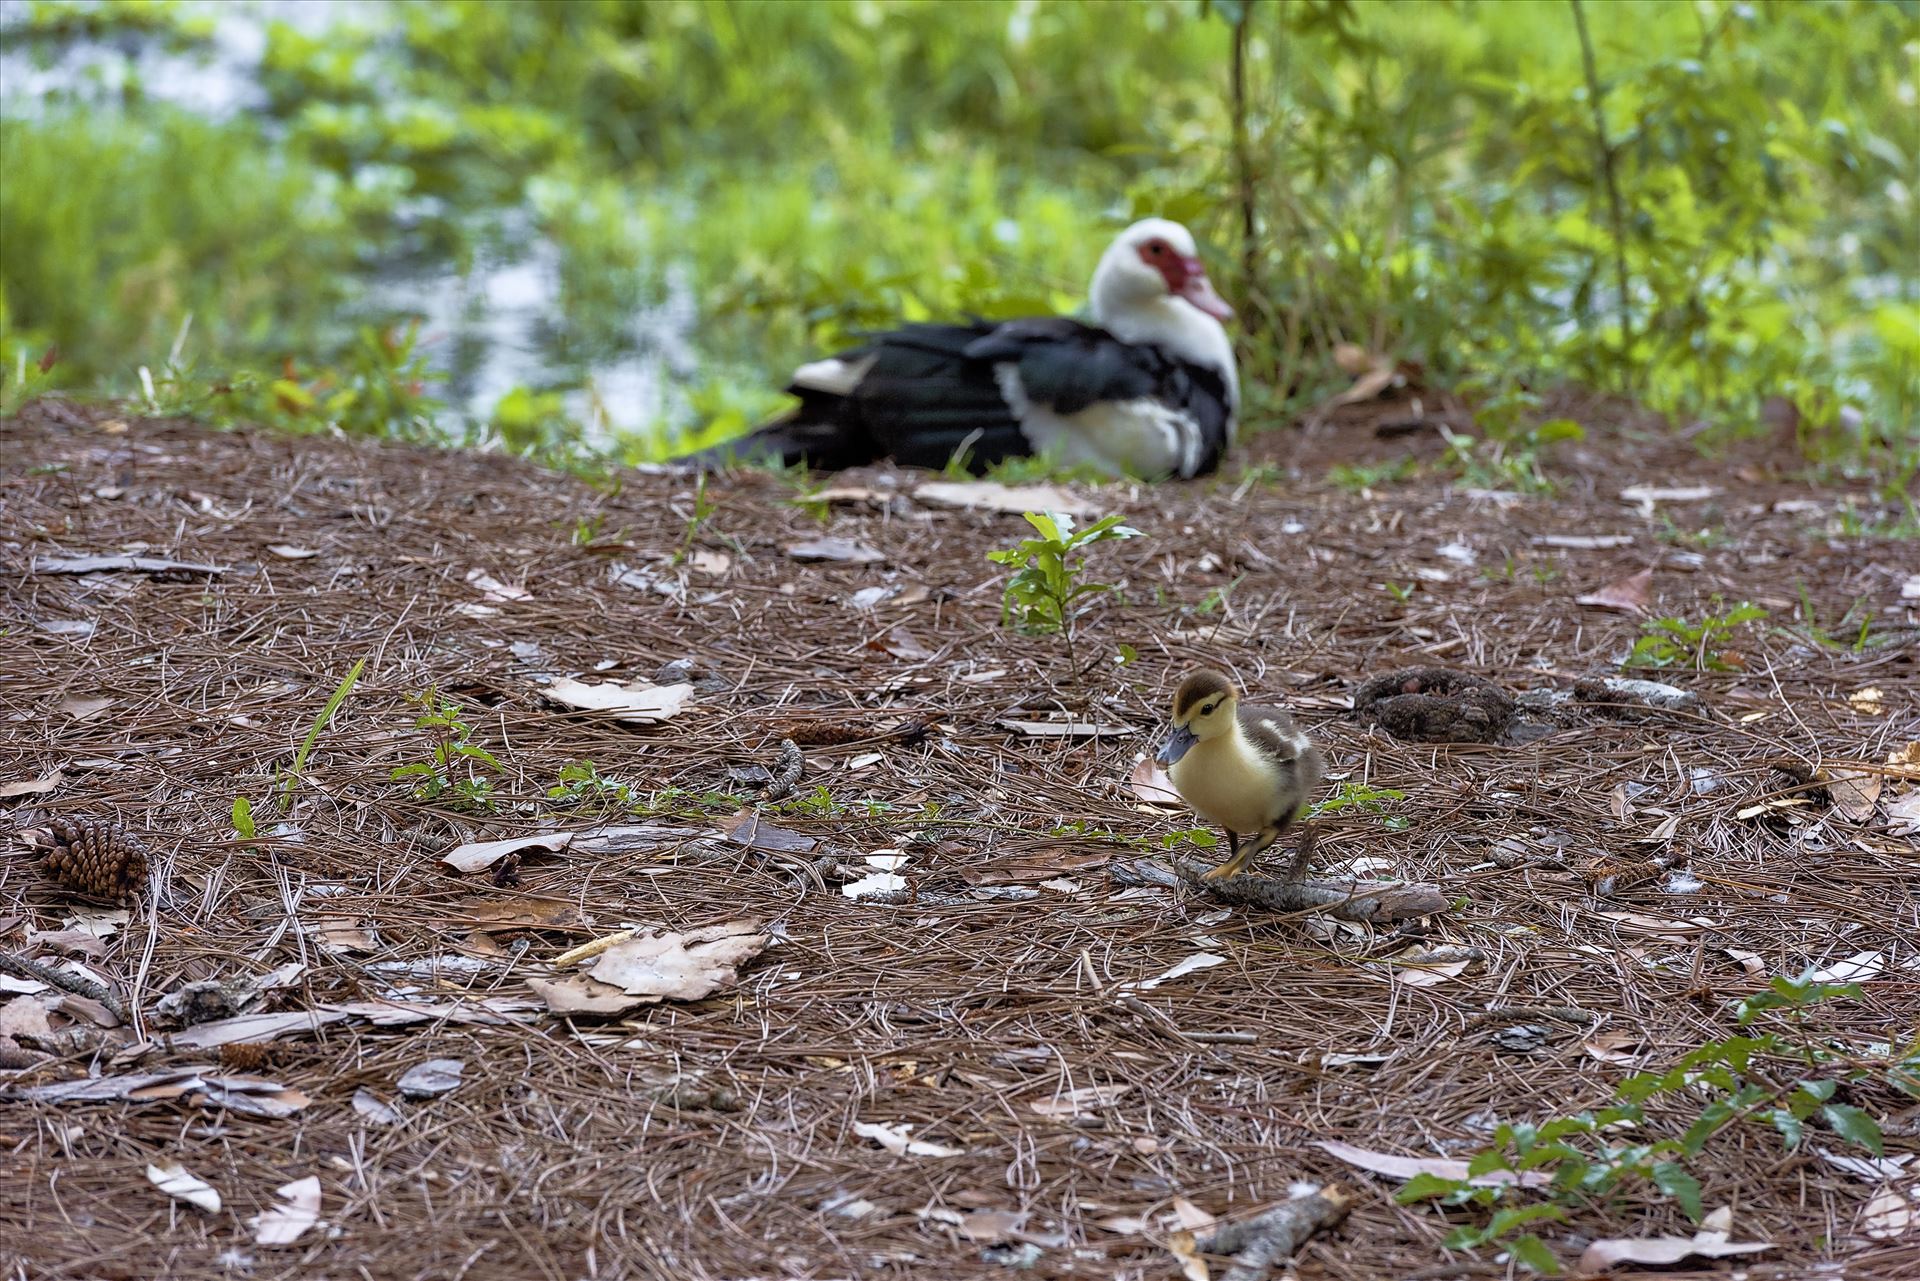 muscovy duckling Bokeh moma in the background sssf 8108848.jpg - muscovy duckling and moma by Terry Kelly Photography